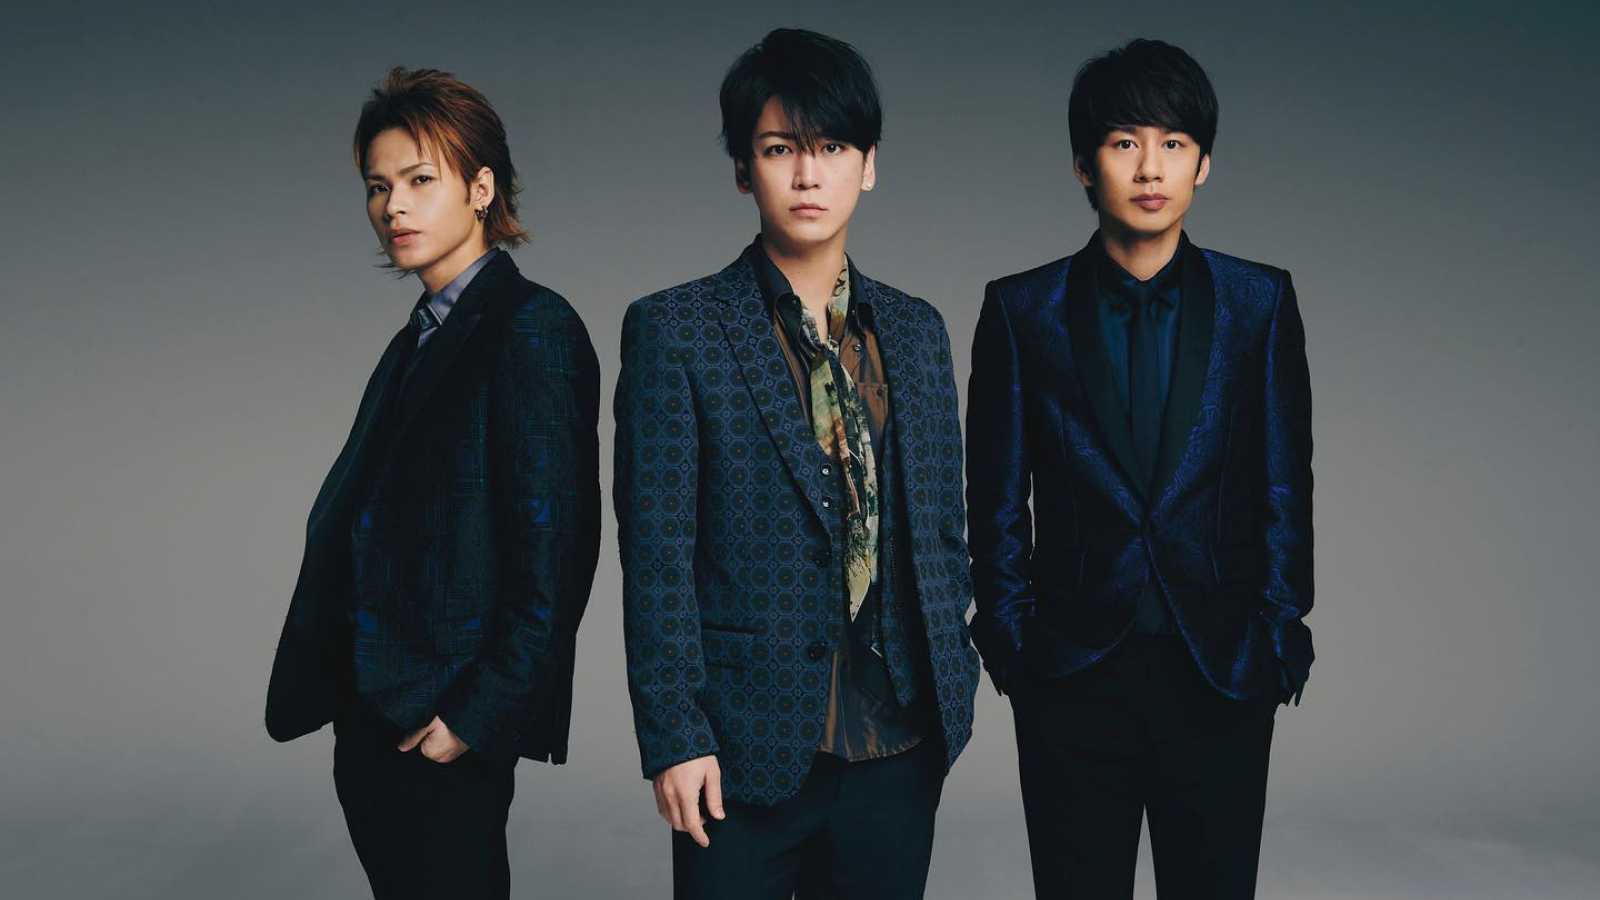 New Single from KAT-TUN © KAT-TUN. All rights reserved.